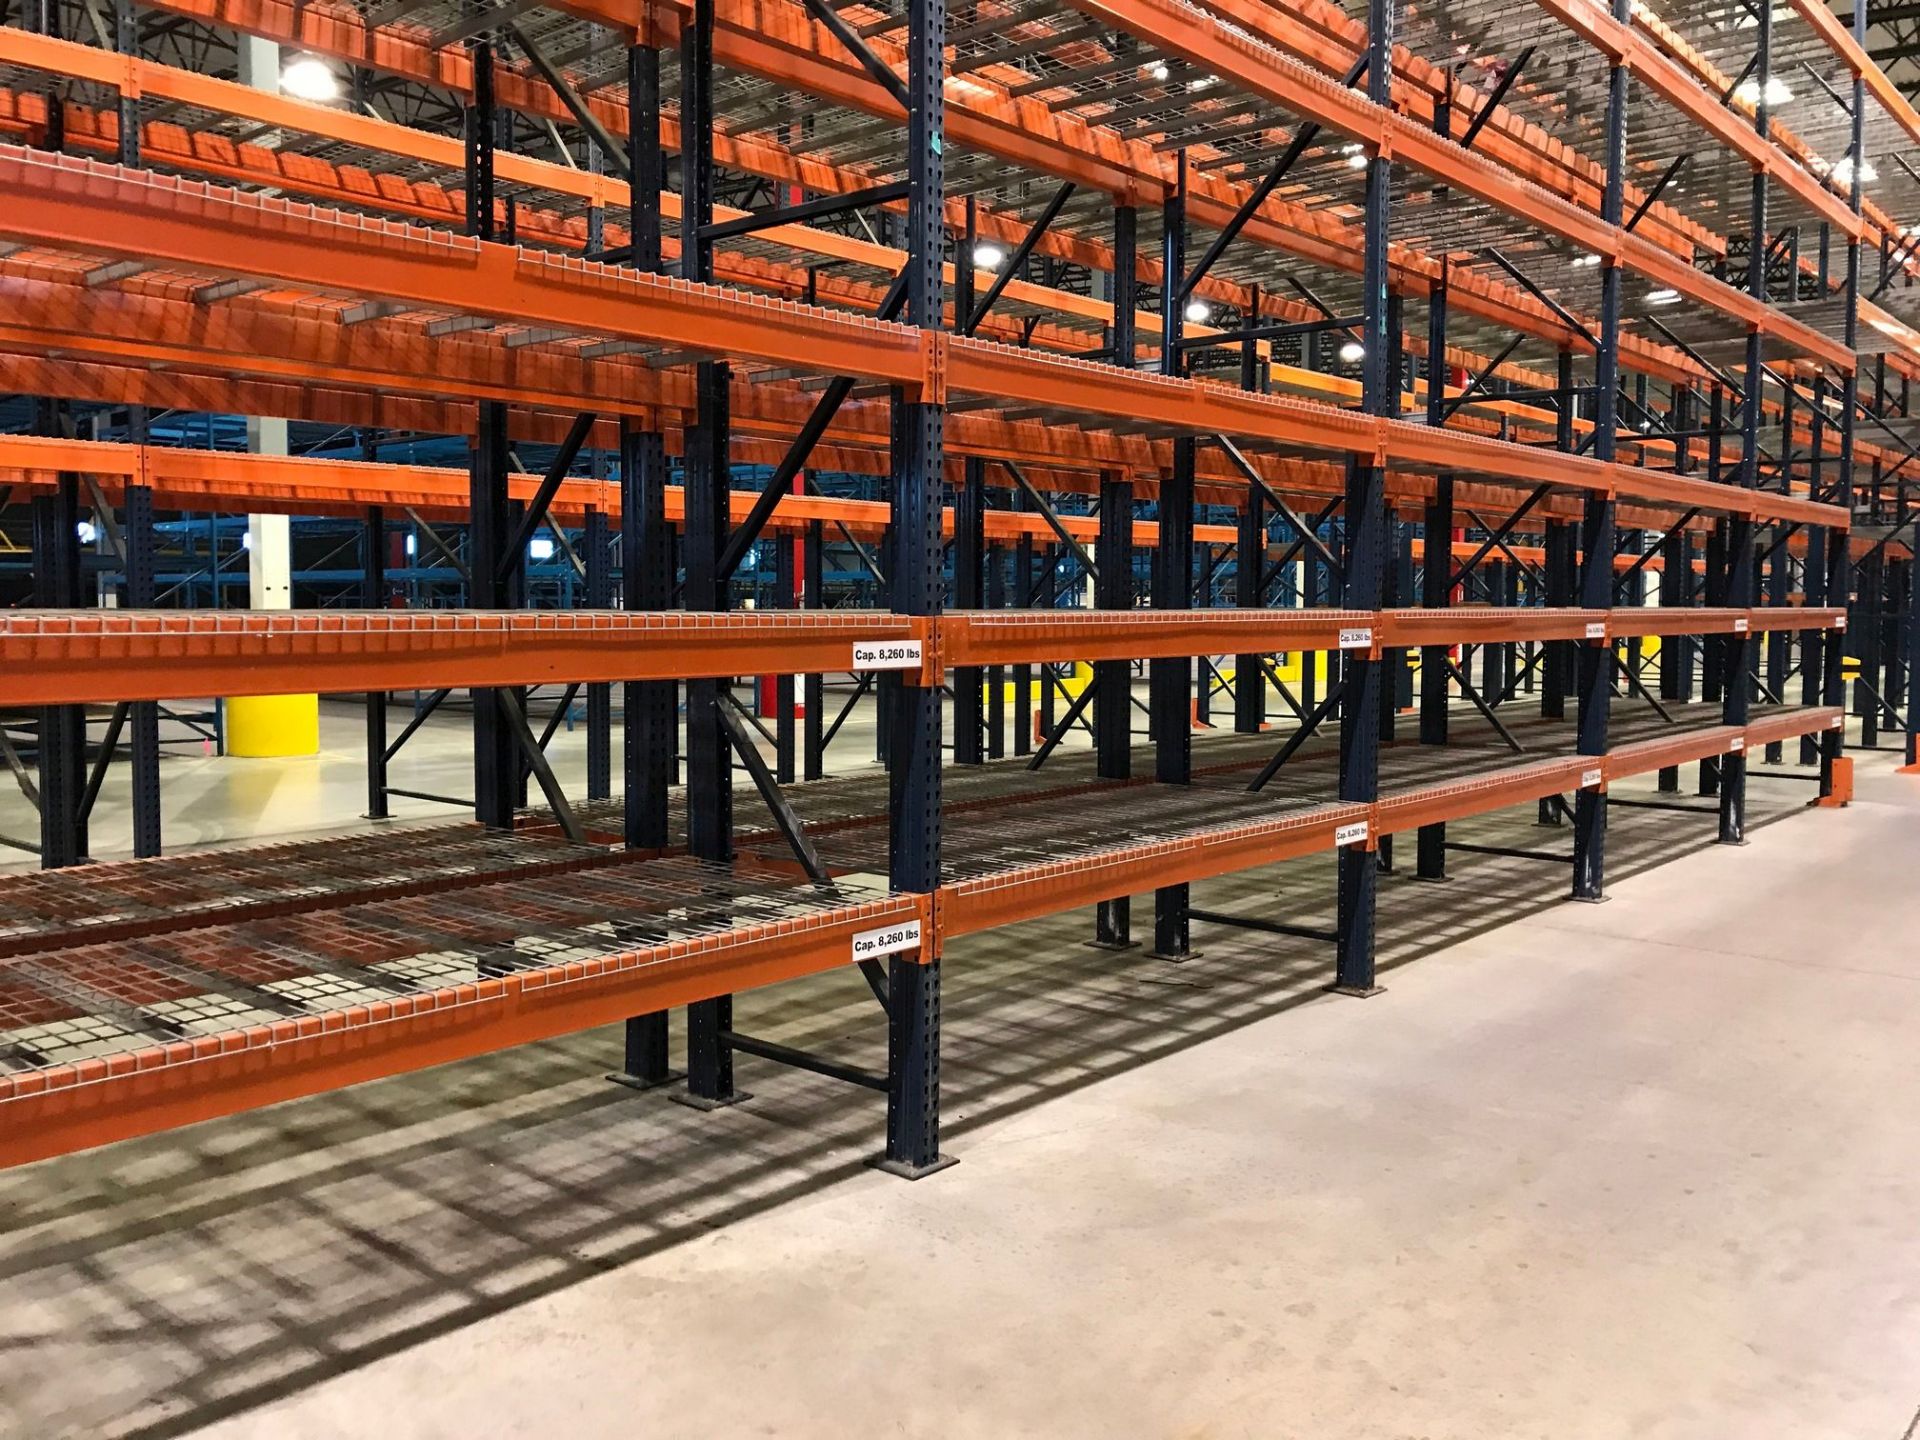 SECTIONS 60" X 108" X 288" TEARDROP TYPE ADJUSTABLE BEAM PALLET RACK WITH WIRE DECKING, 6" HIGH - Image 14 of 14